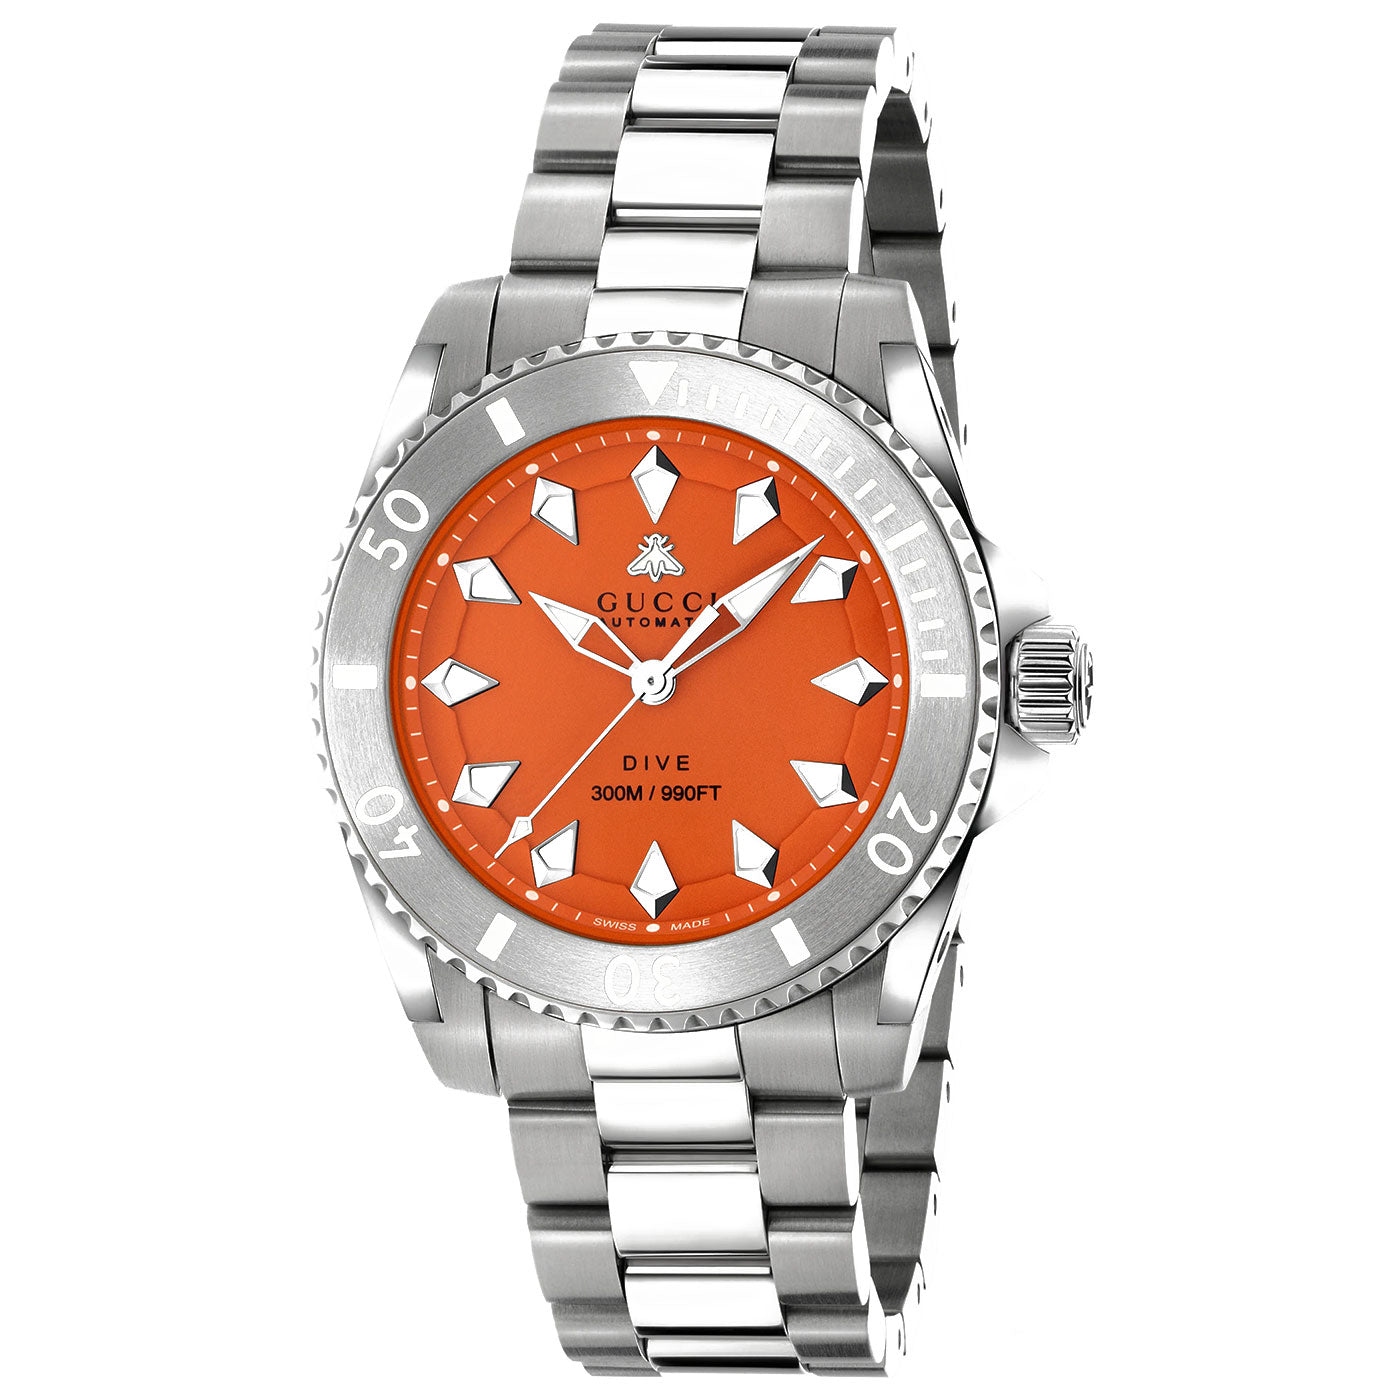 Gucci Dive Automatic 40mm Watch